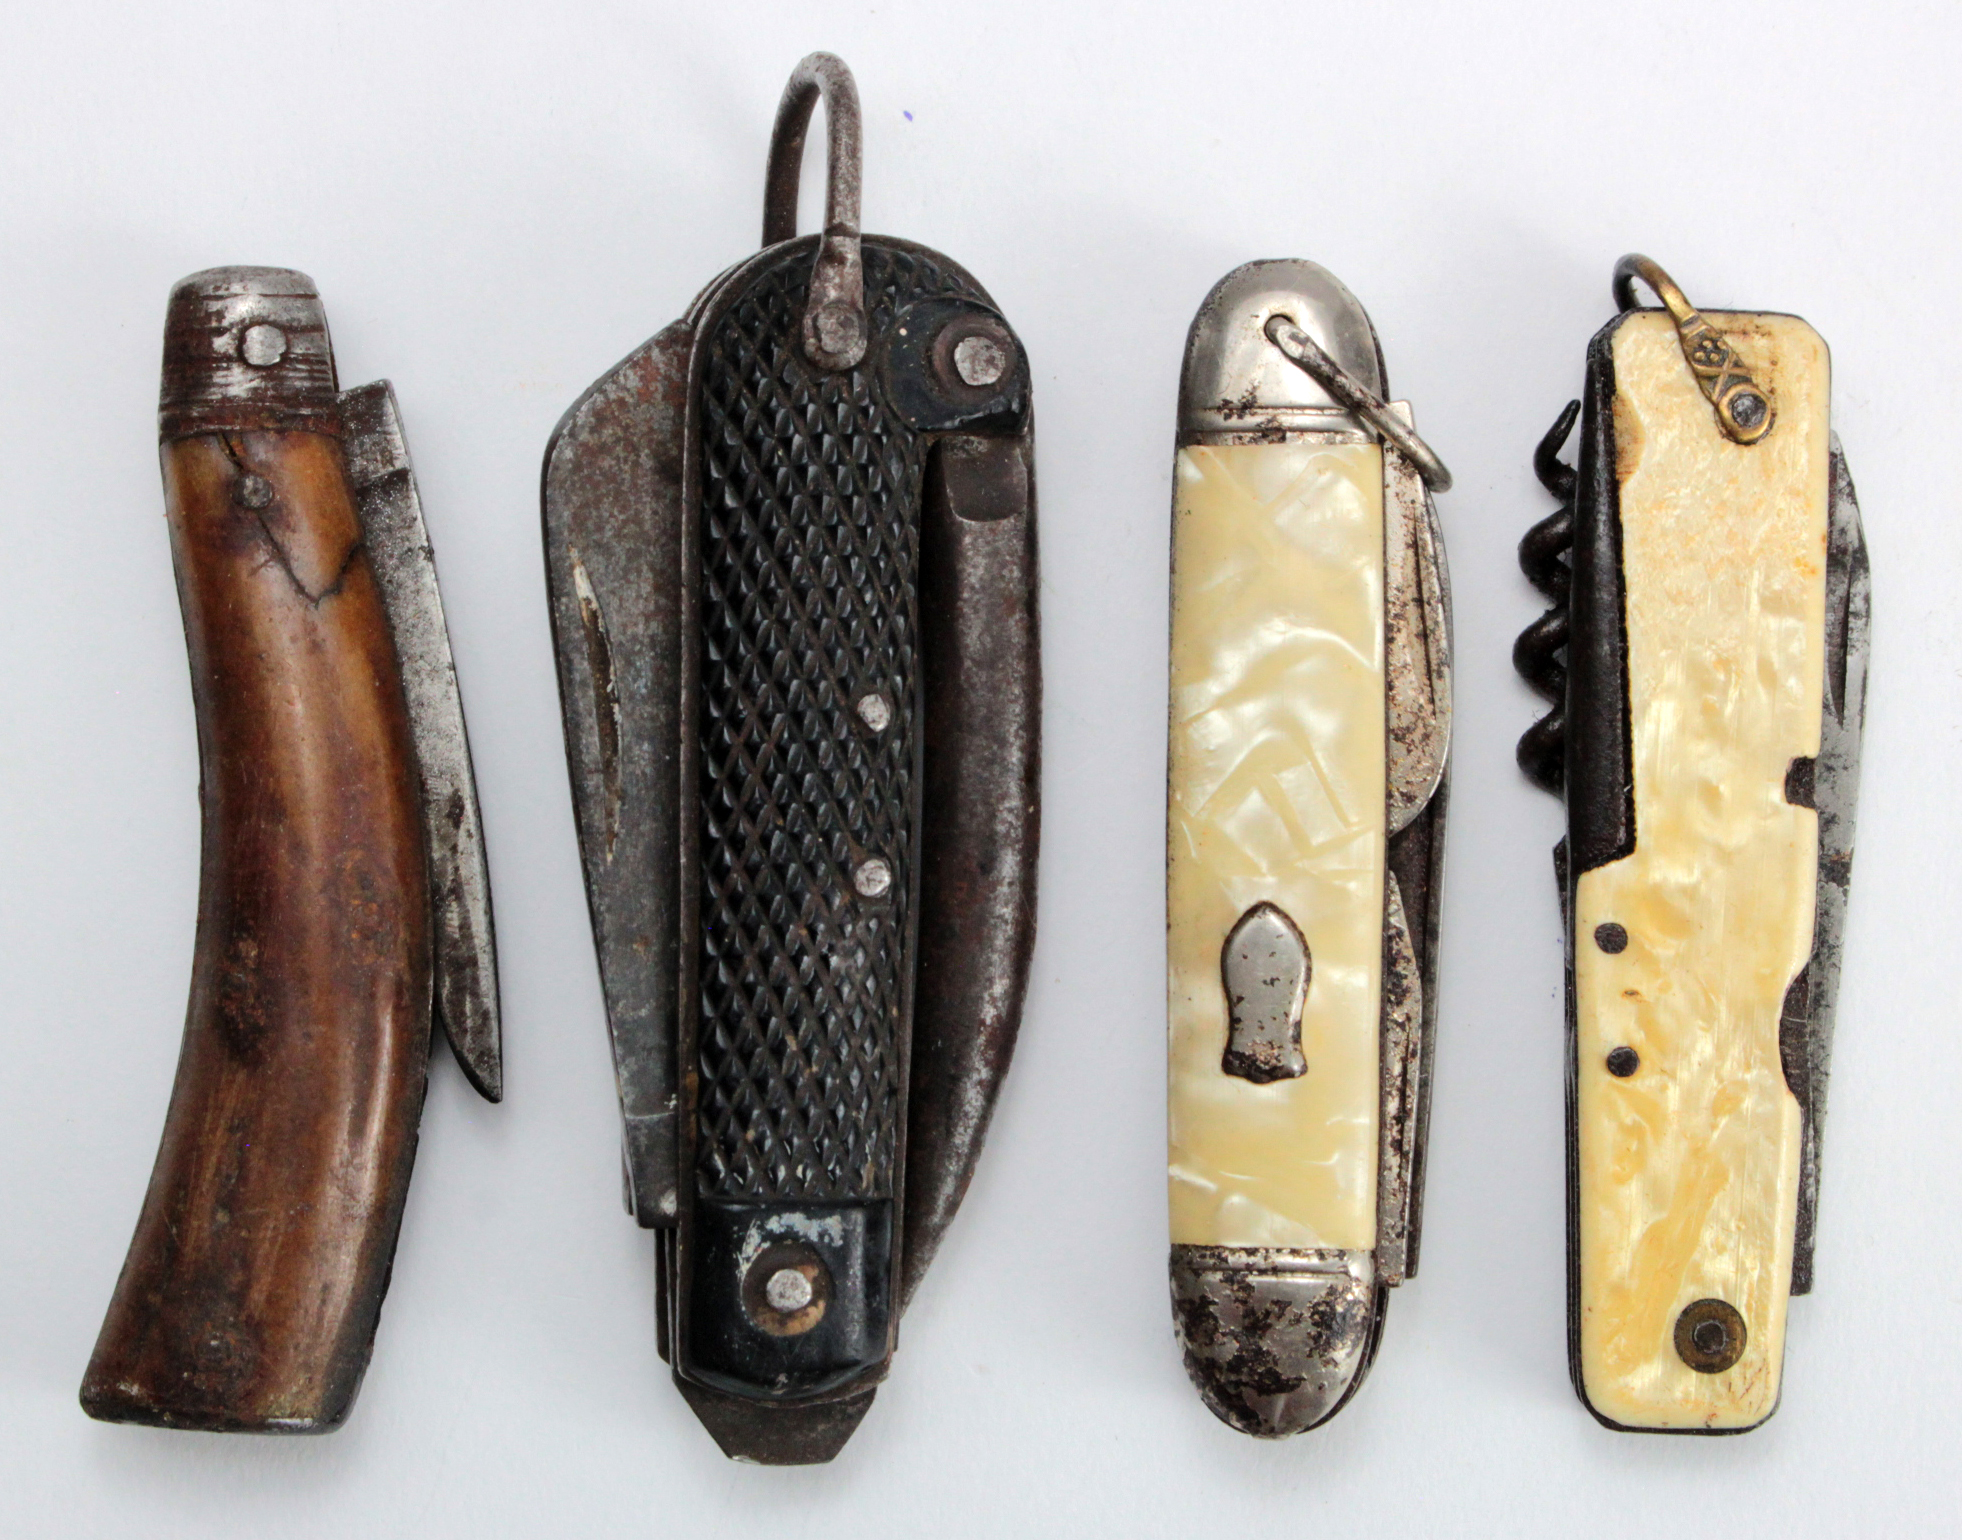 Collection of various pocket knives some military